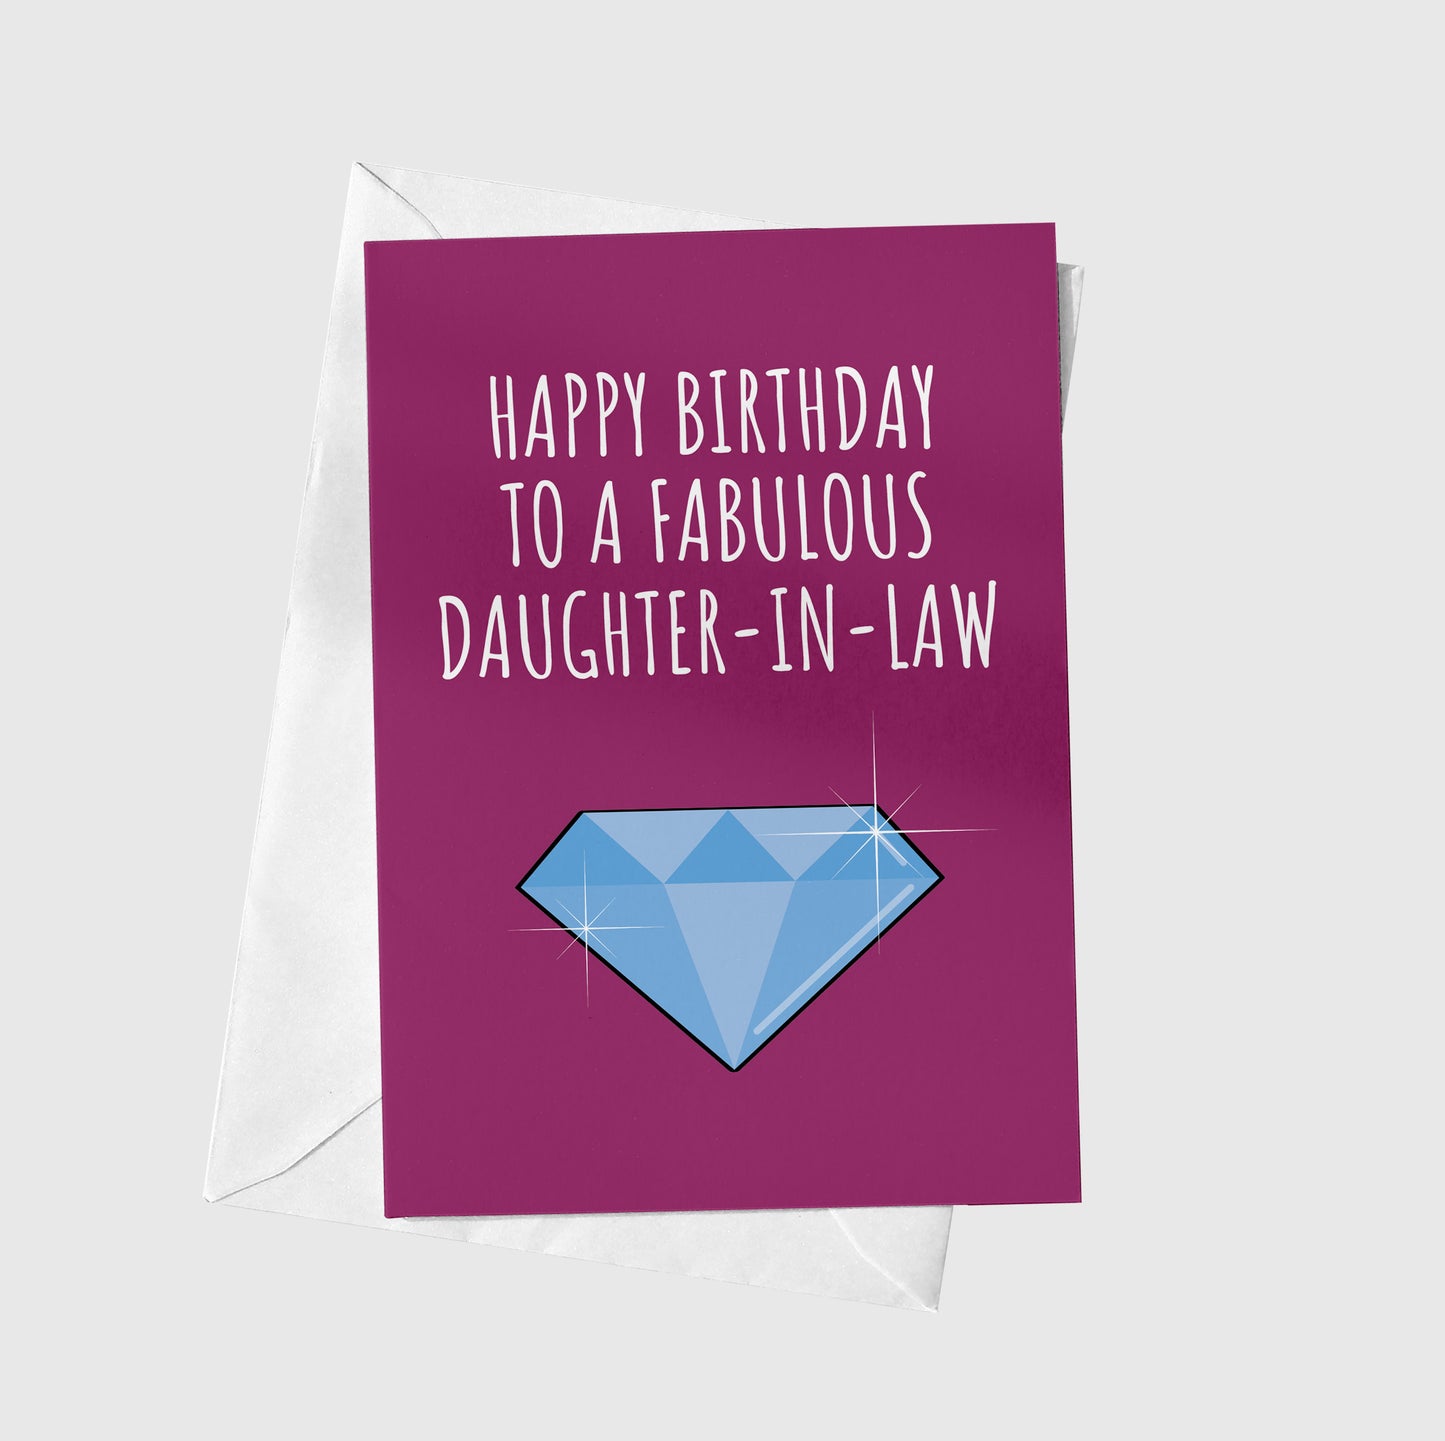 To a fabulous daughter-in-law